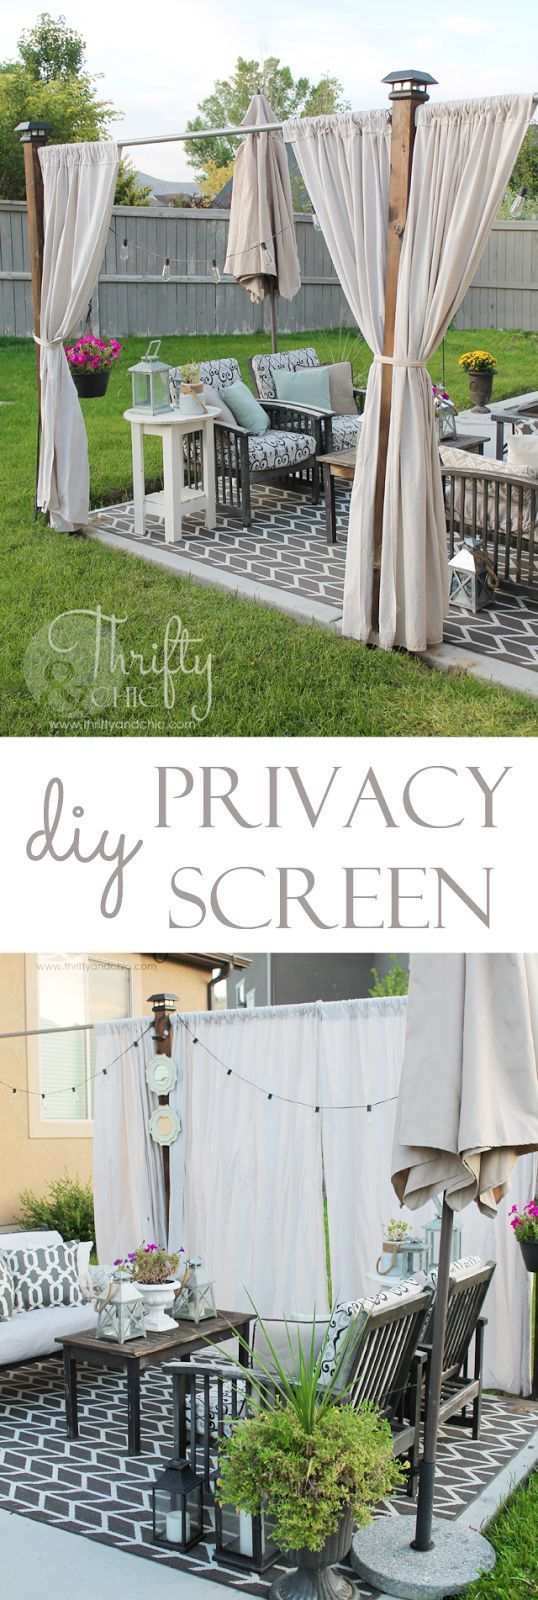 DIY your Christmas gifts this year with 925 sterling silver photo charms from GLAMULET. they are 100% compatible with Pandora bracelets. DIY privacy screen. Can make permanent or not! All under $100 for three post screen -   20 outdoor diy patio
 ideas